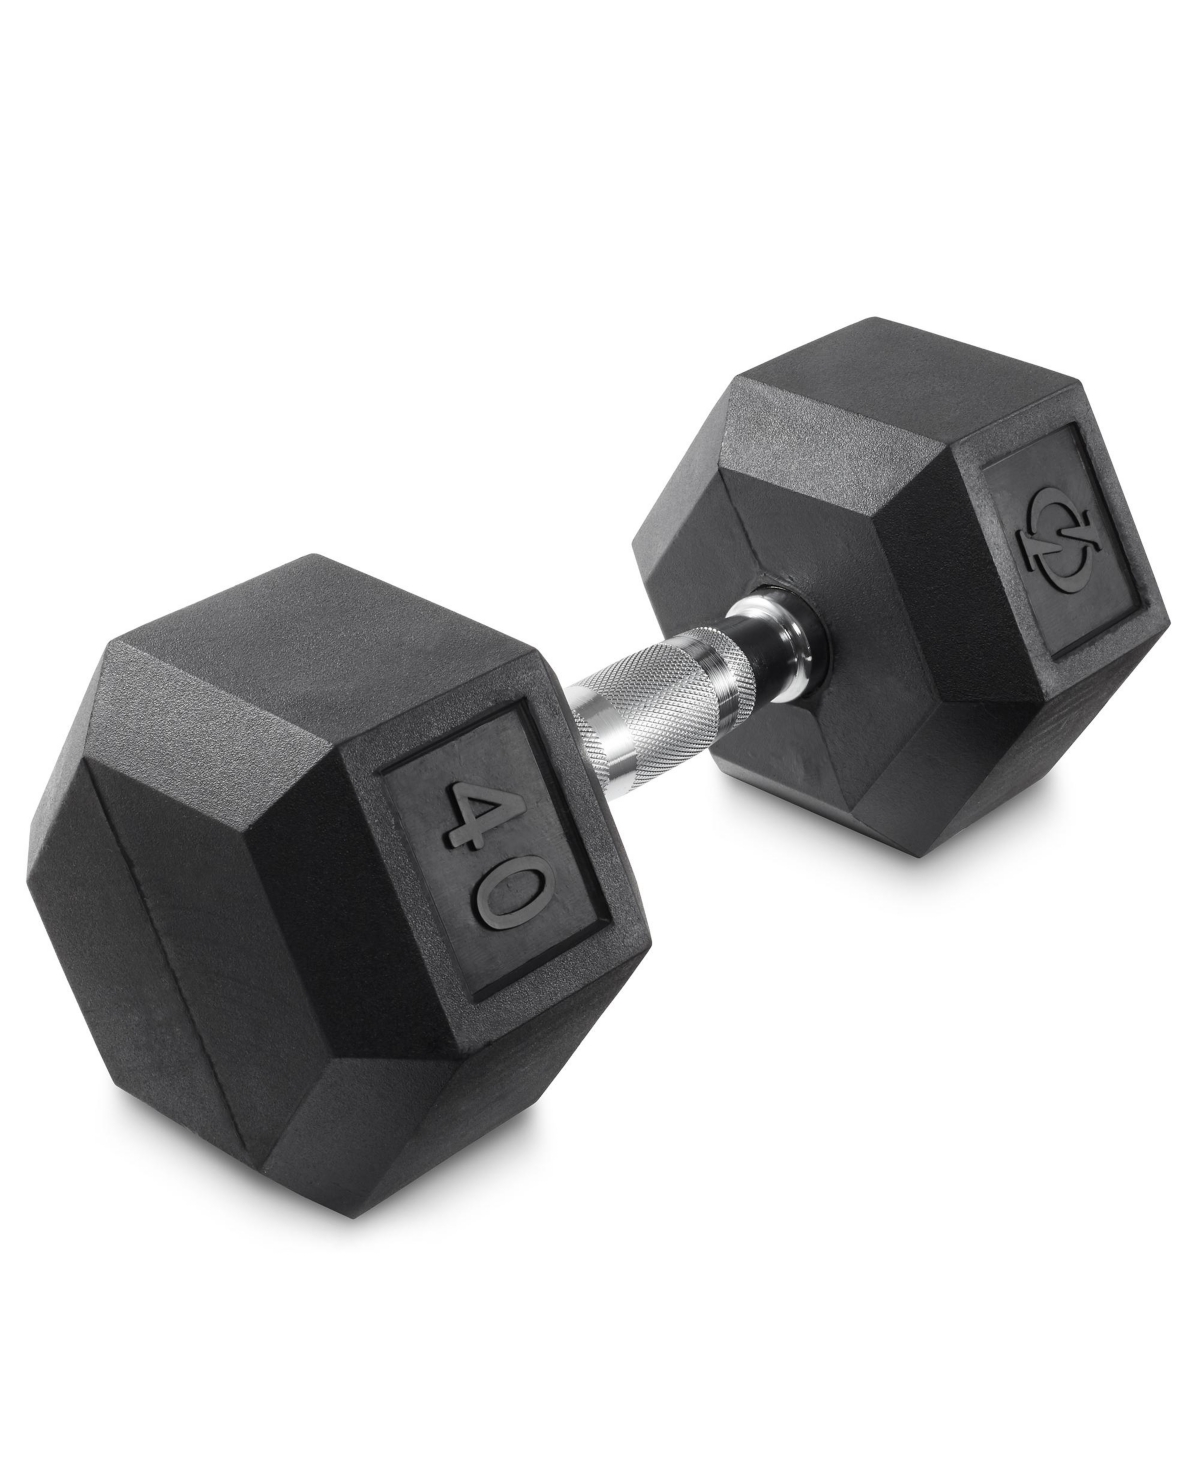 Rubber Coated Hex Dumbbell Hand Weight, 40 lbs - Black